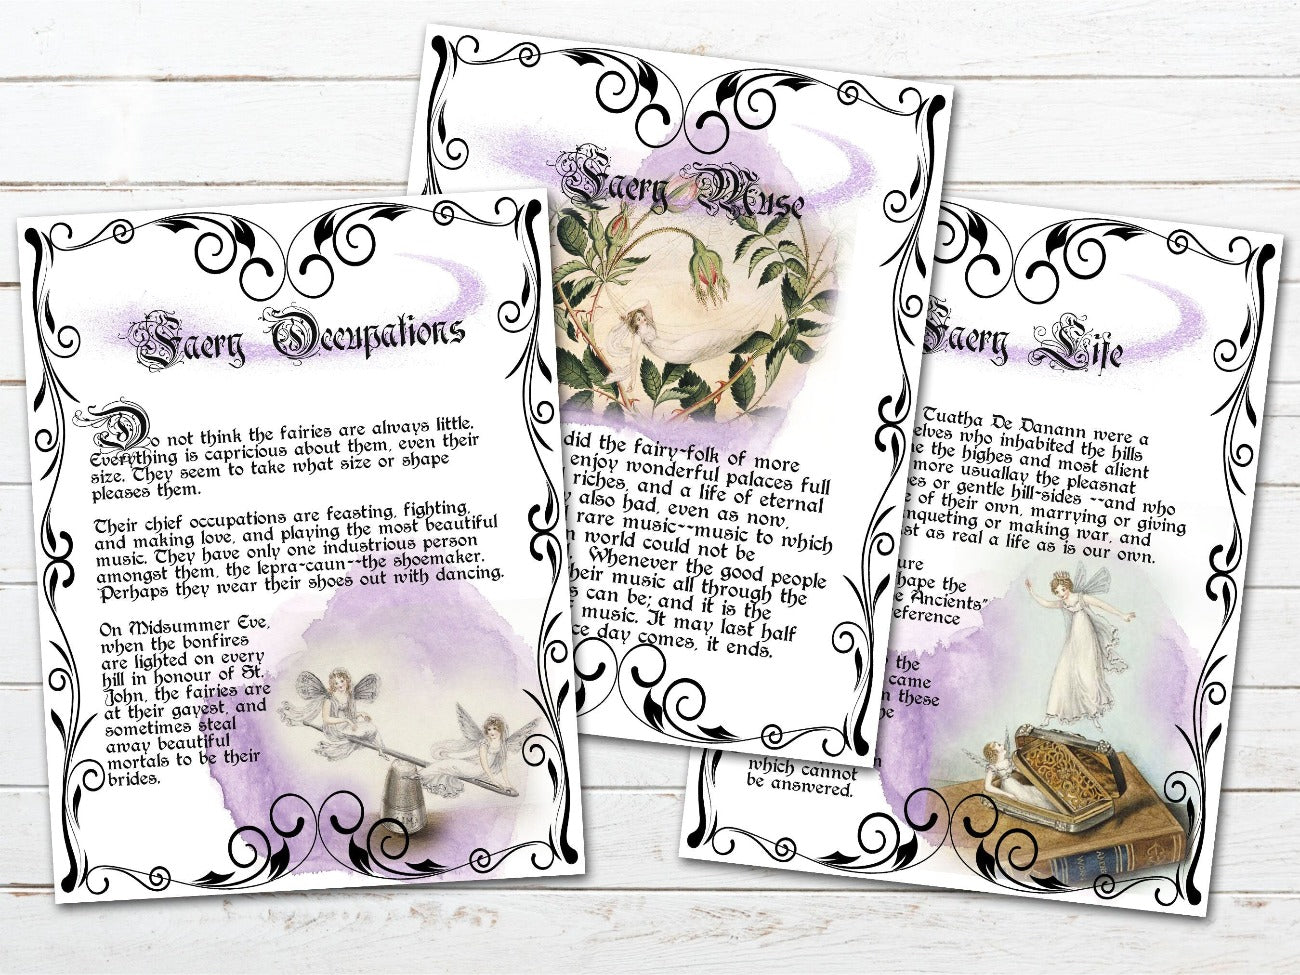 Faery Occupations, Faery Muse, Faery Life pages - Morgana Magick Spell